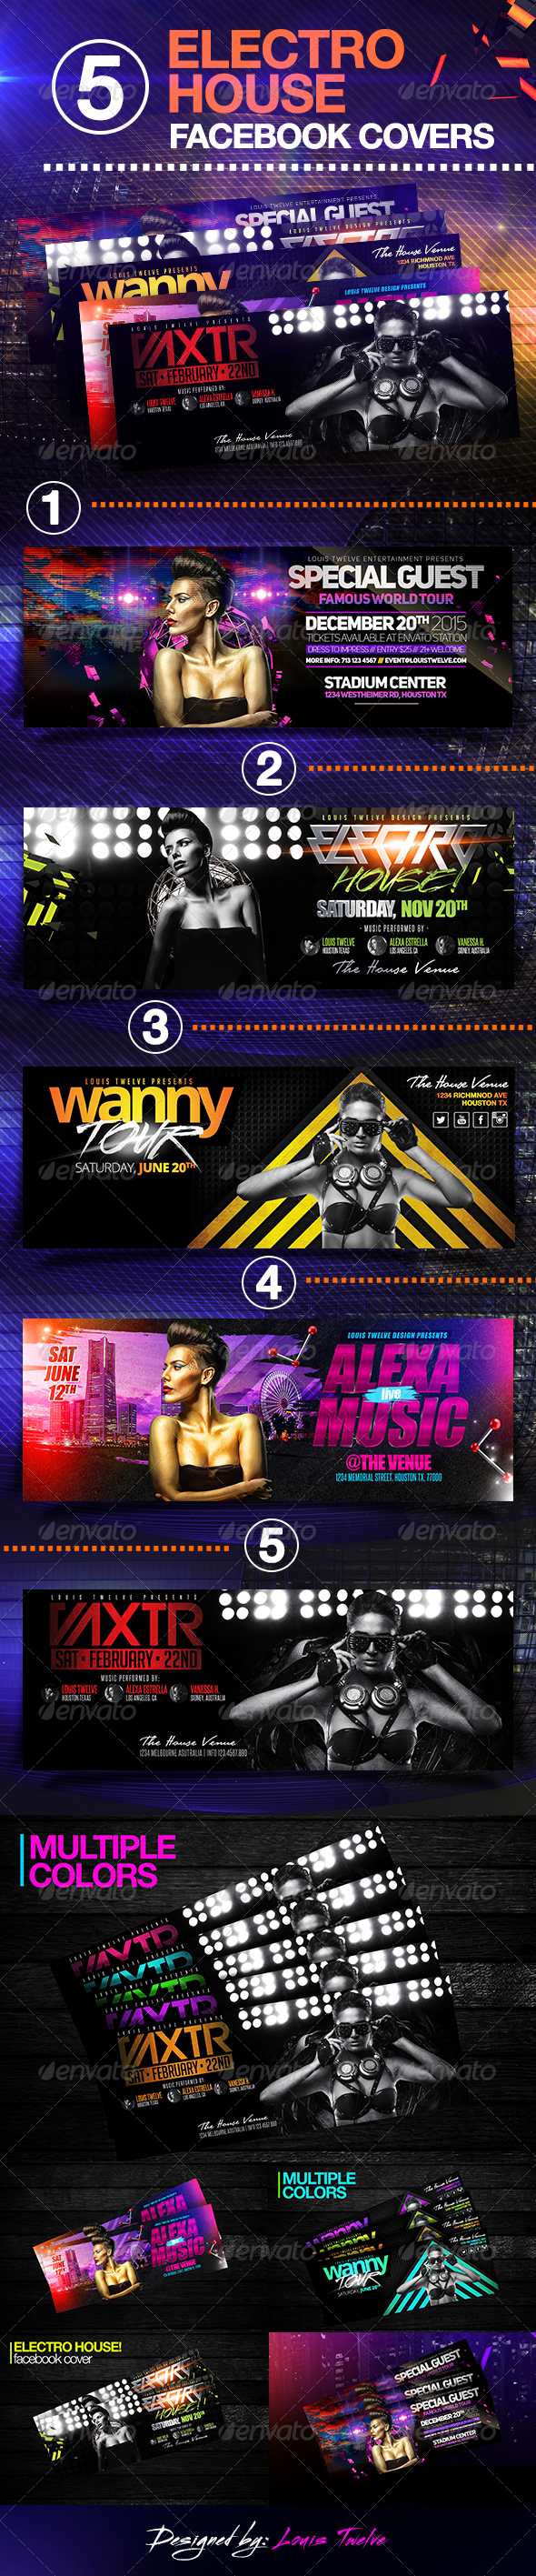 05 Electro House Facebook Covers